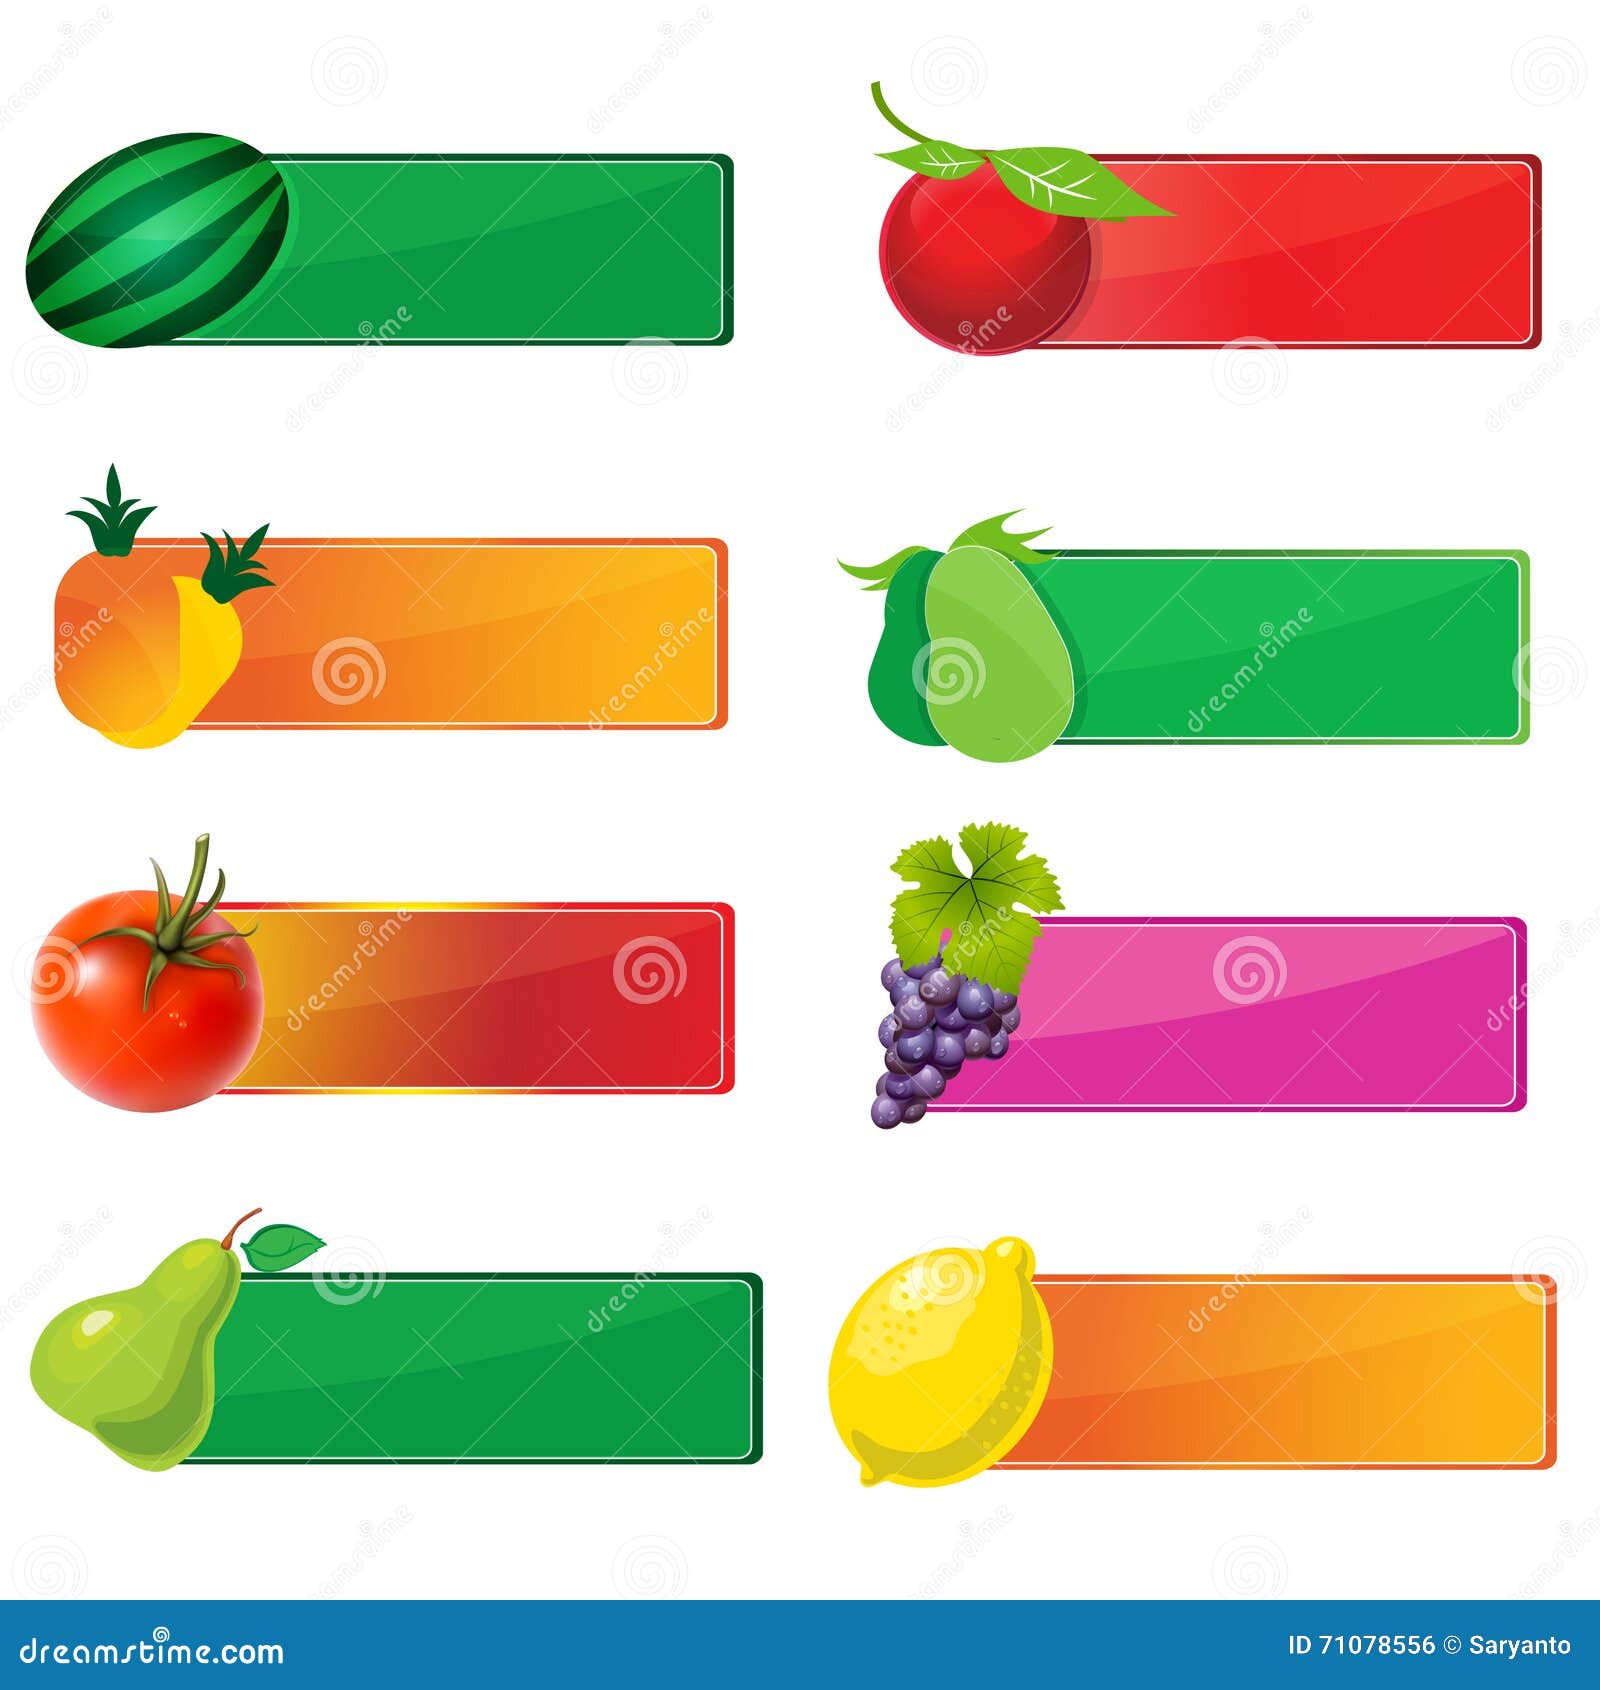 Collection of icons fruits stock vector. Illustration of icons - 71078556